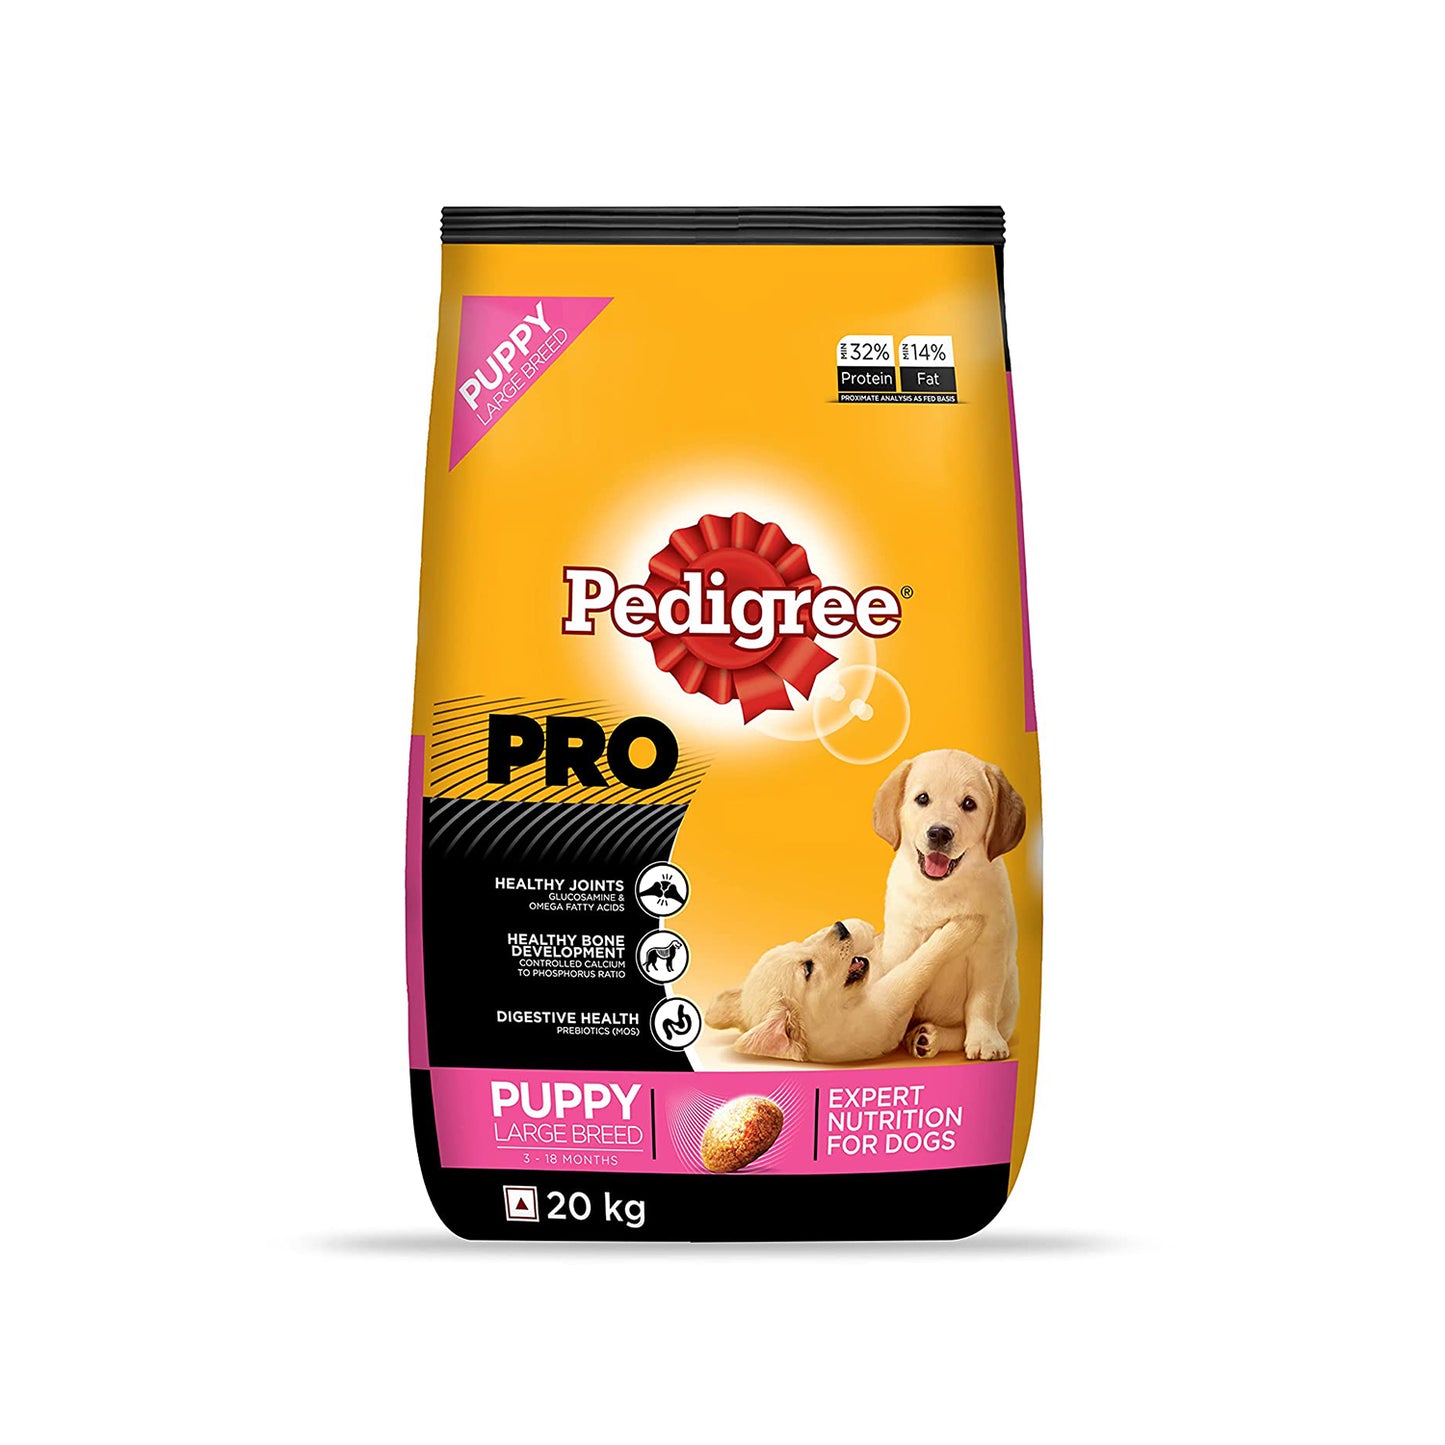 Pedigree - PRO Expert Nutrition Large Breed Puppy (3-18 Months) Dry Dog Food